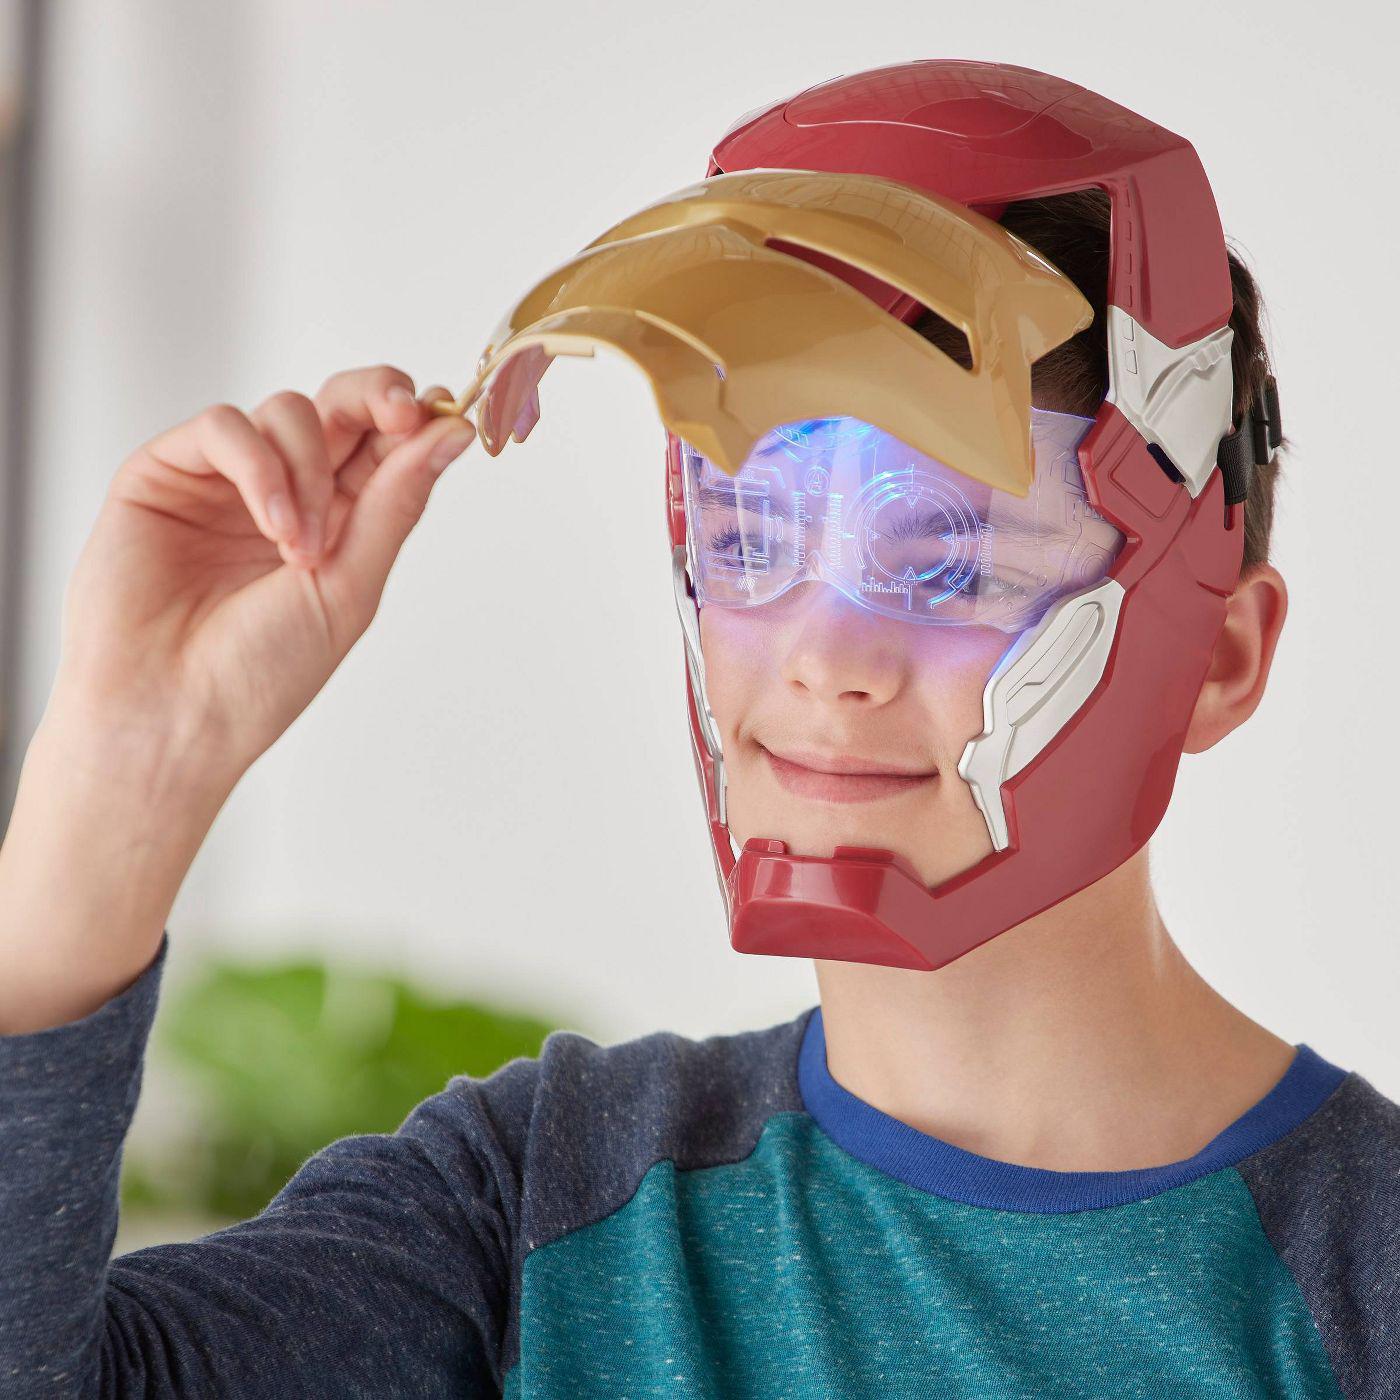 Avengers Marvel Iron Man Flip FX Mask with Flip-Activated Light Effects